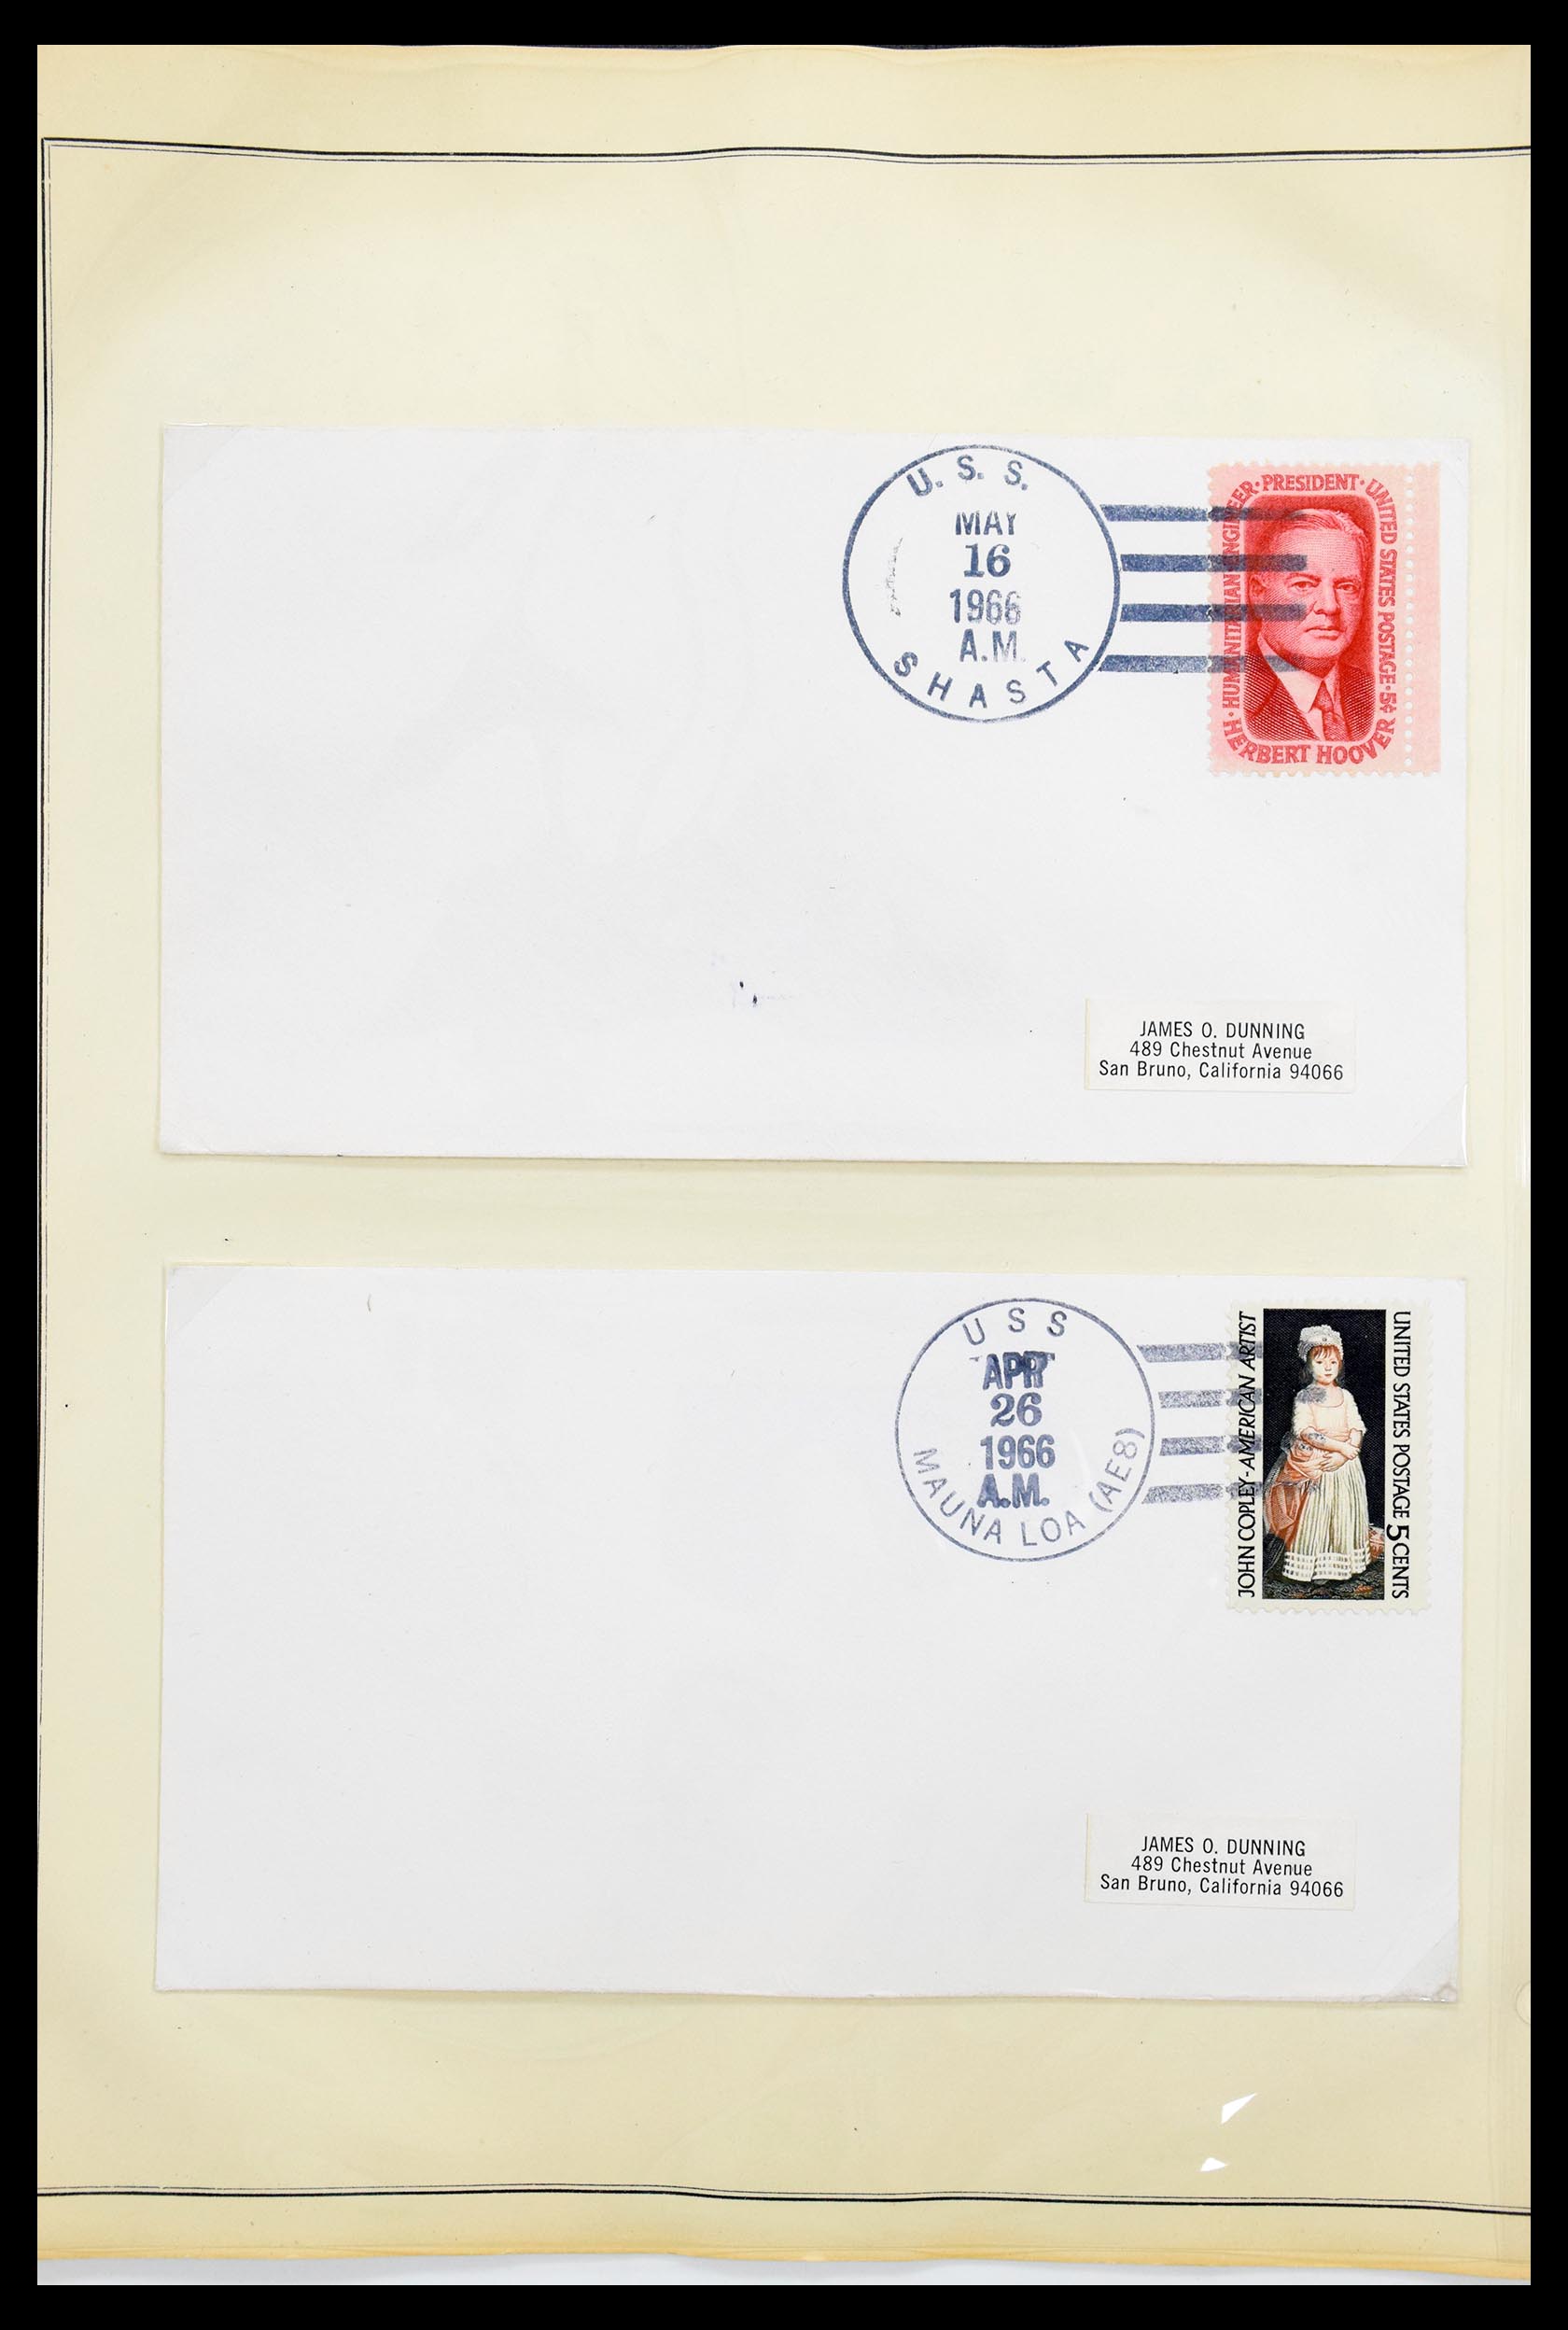 30341 014 - 30341 USA naval cover collection 1930-1970.